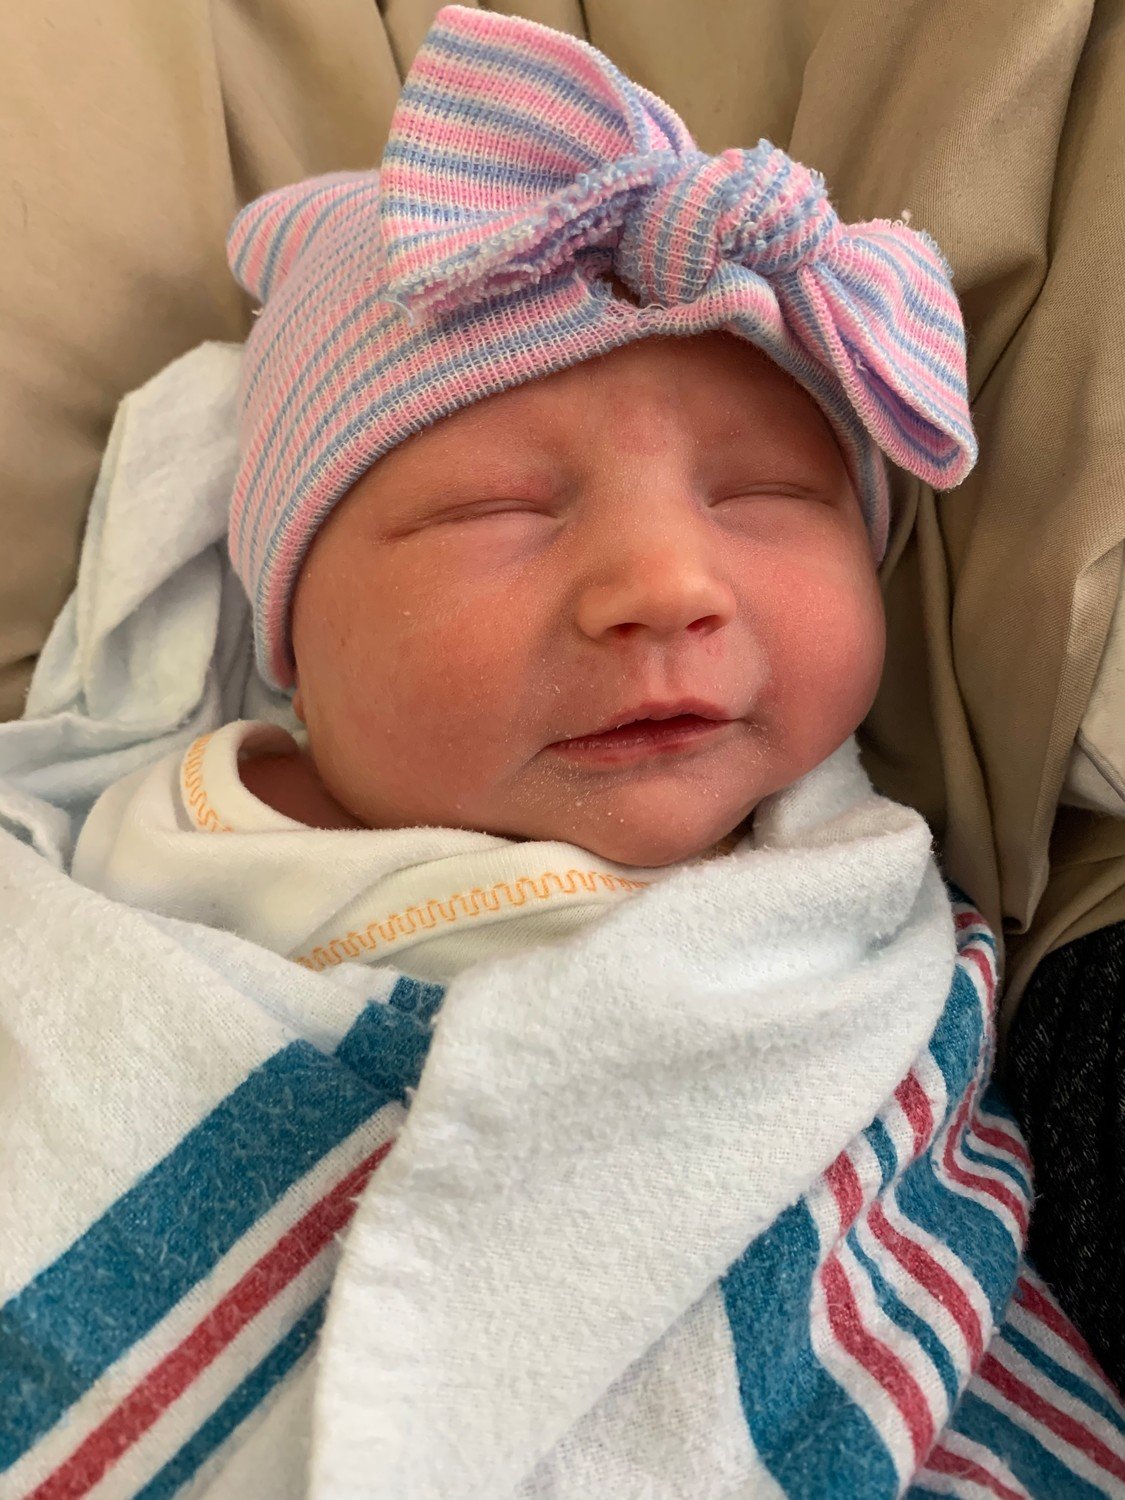 Darby Lynn Carr was born March 2 to David and Kendall (Rhodes) Carr.